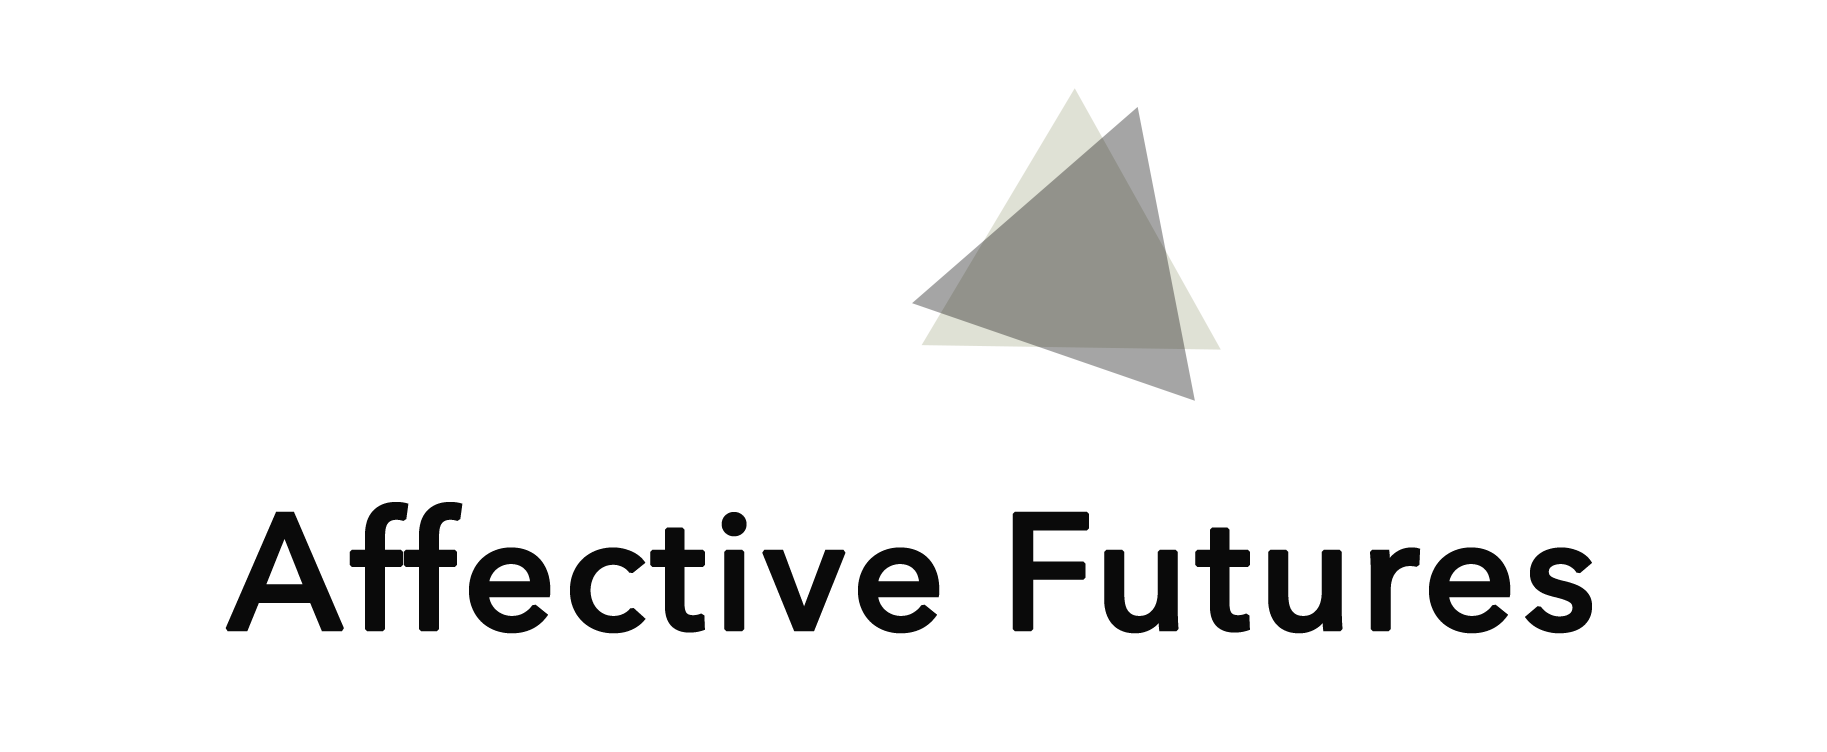 our Affective Futures